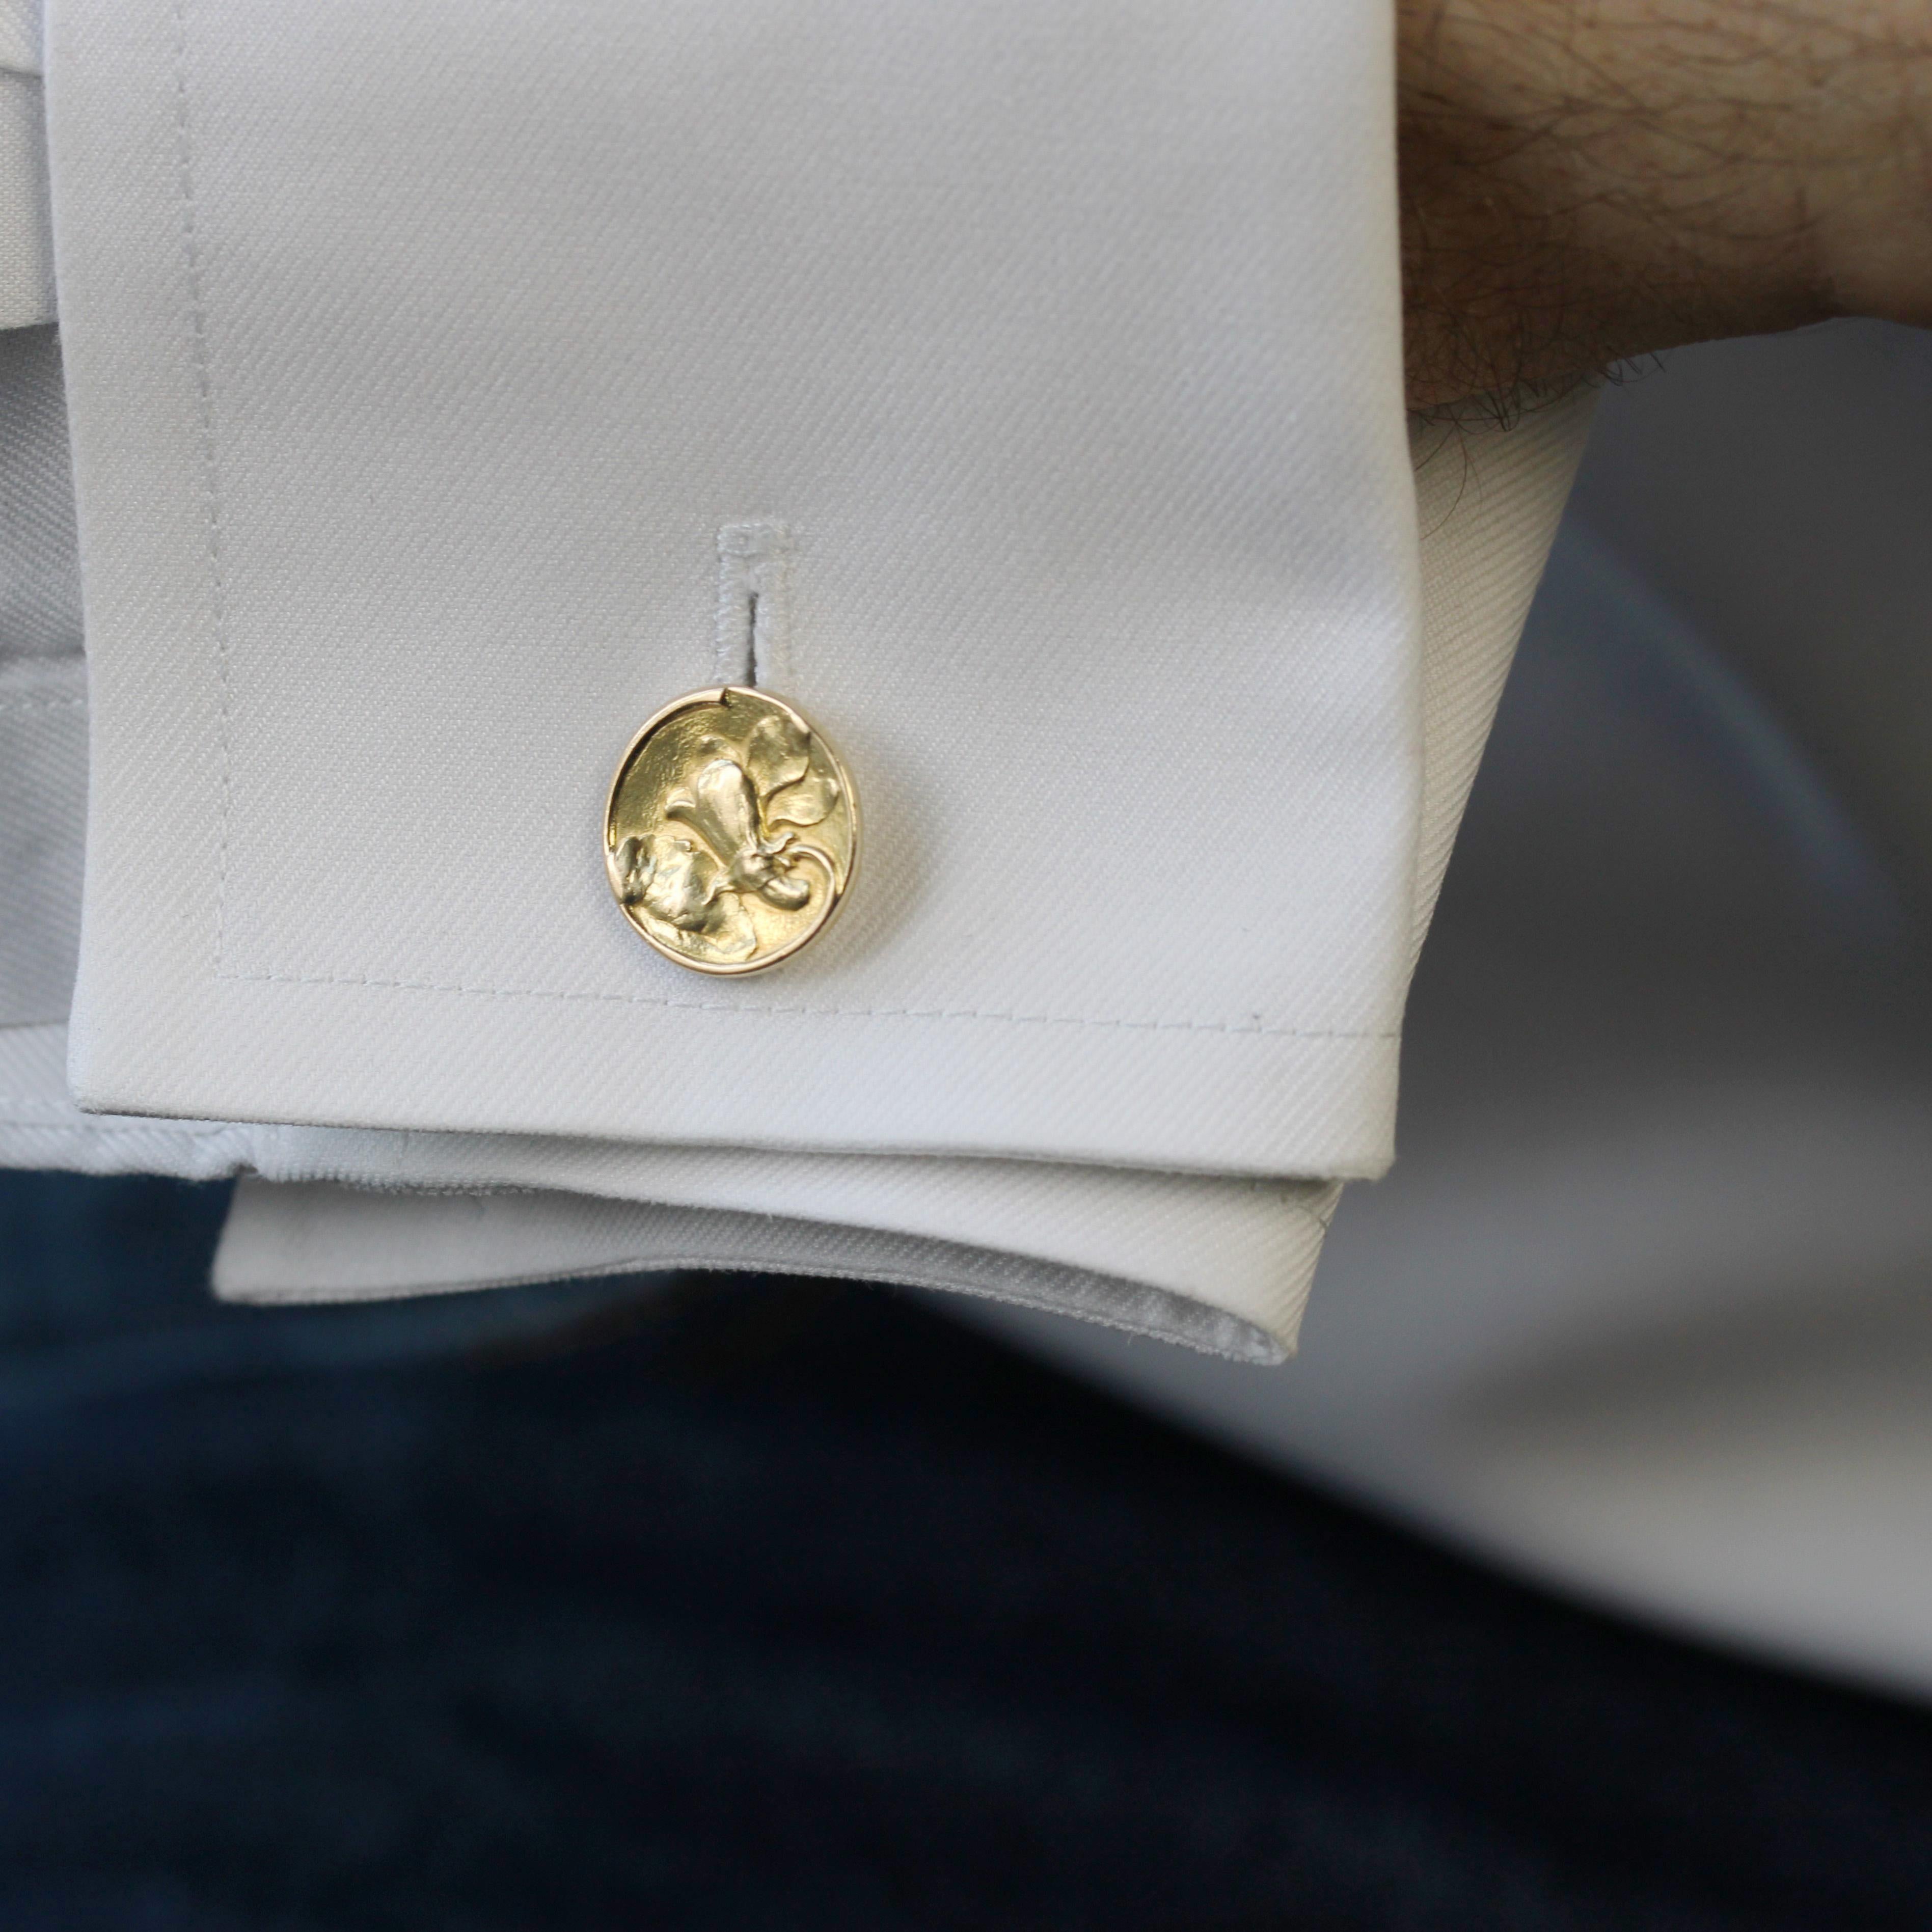 Pair of cufflinks in 18 karats yellow gold, eagle's head hallmark.
Round shaped, and slightly curved, these cufflinks are composed of 2 circles decorated with lily flowers and held by a chain.
Diameter: 14.2 mm, thickness: about 1 mm, length of the